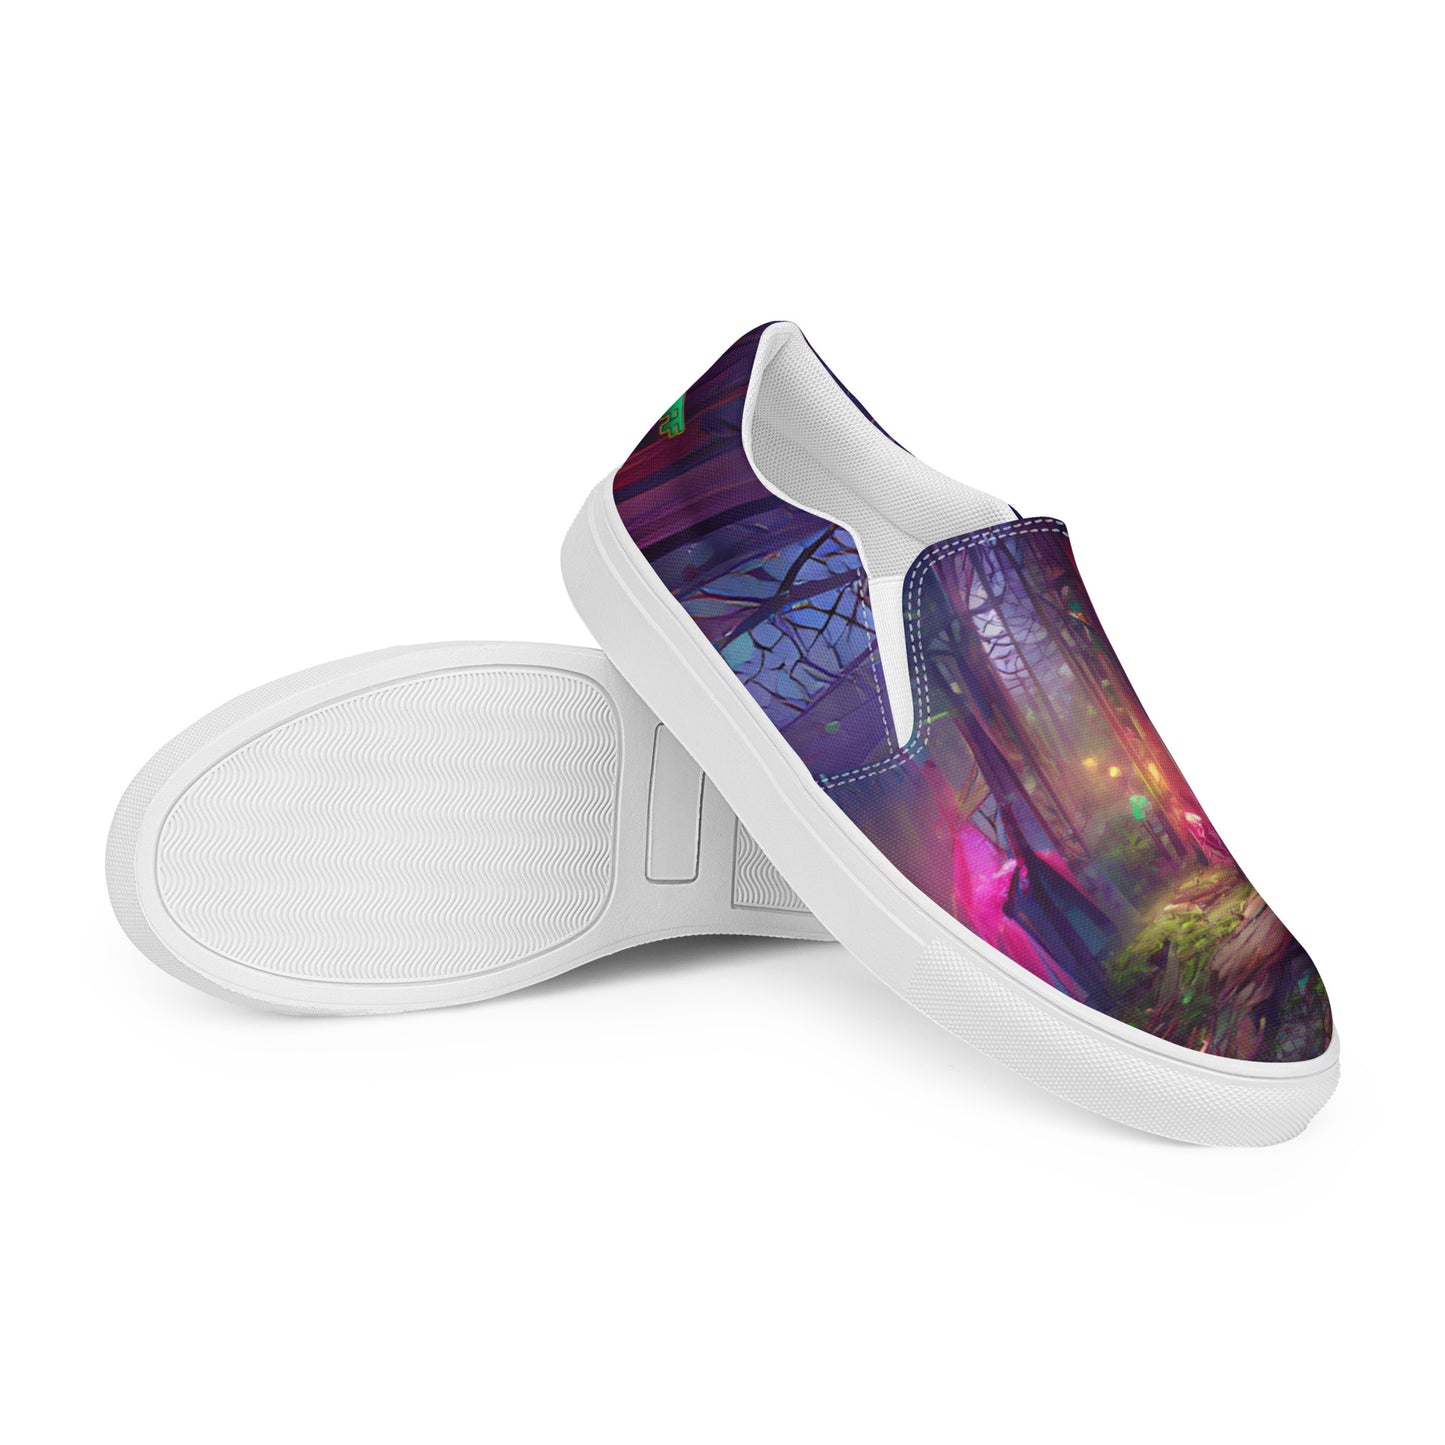 OUT OF THE DARK (Men’s Slip-On Canvas Shoes)